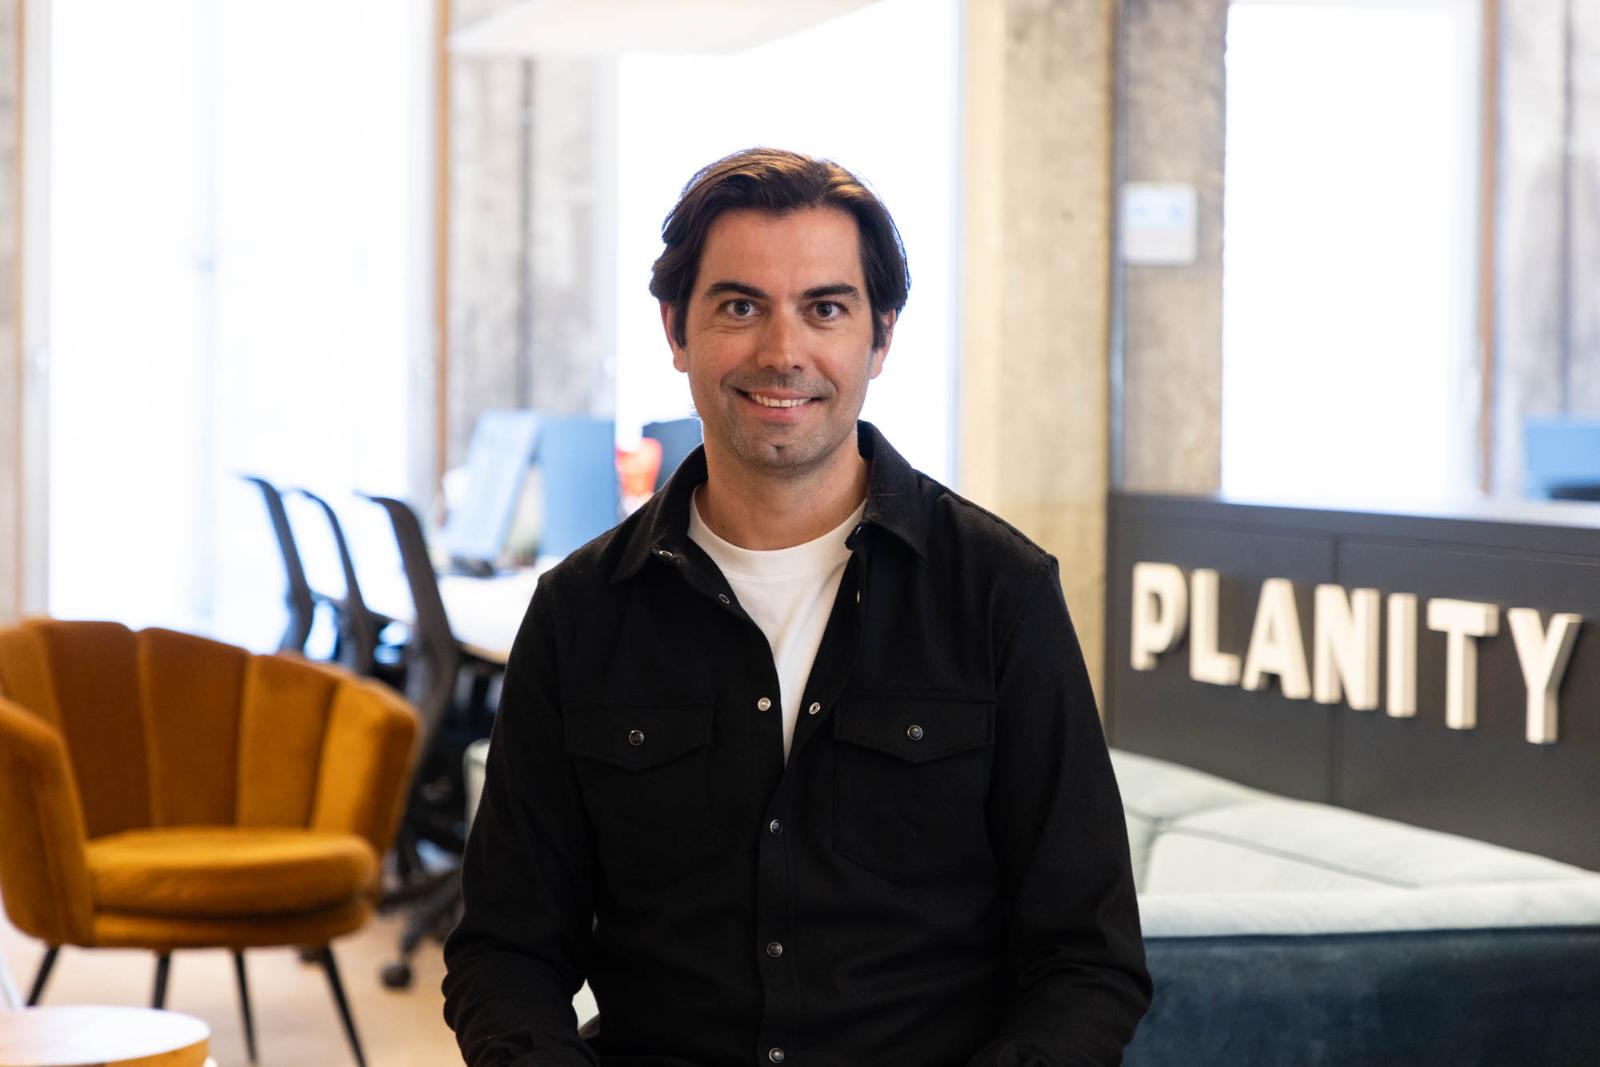 Planity raises $48 million because even hair salons need their own SaaS product